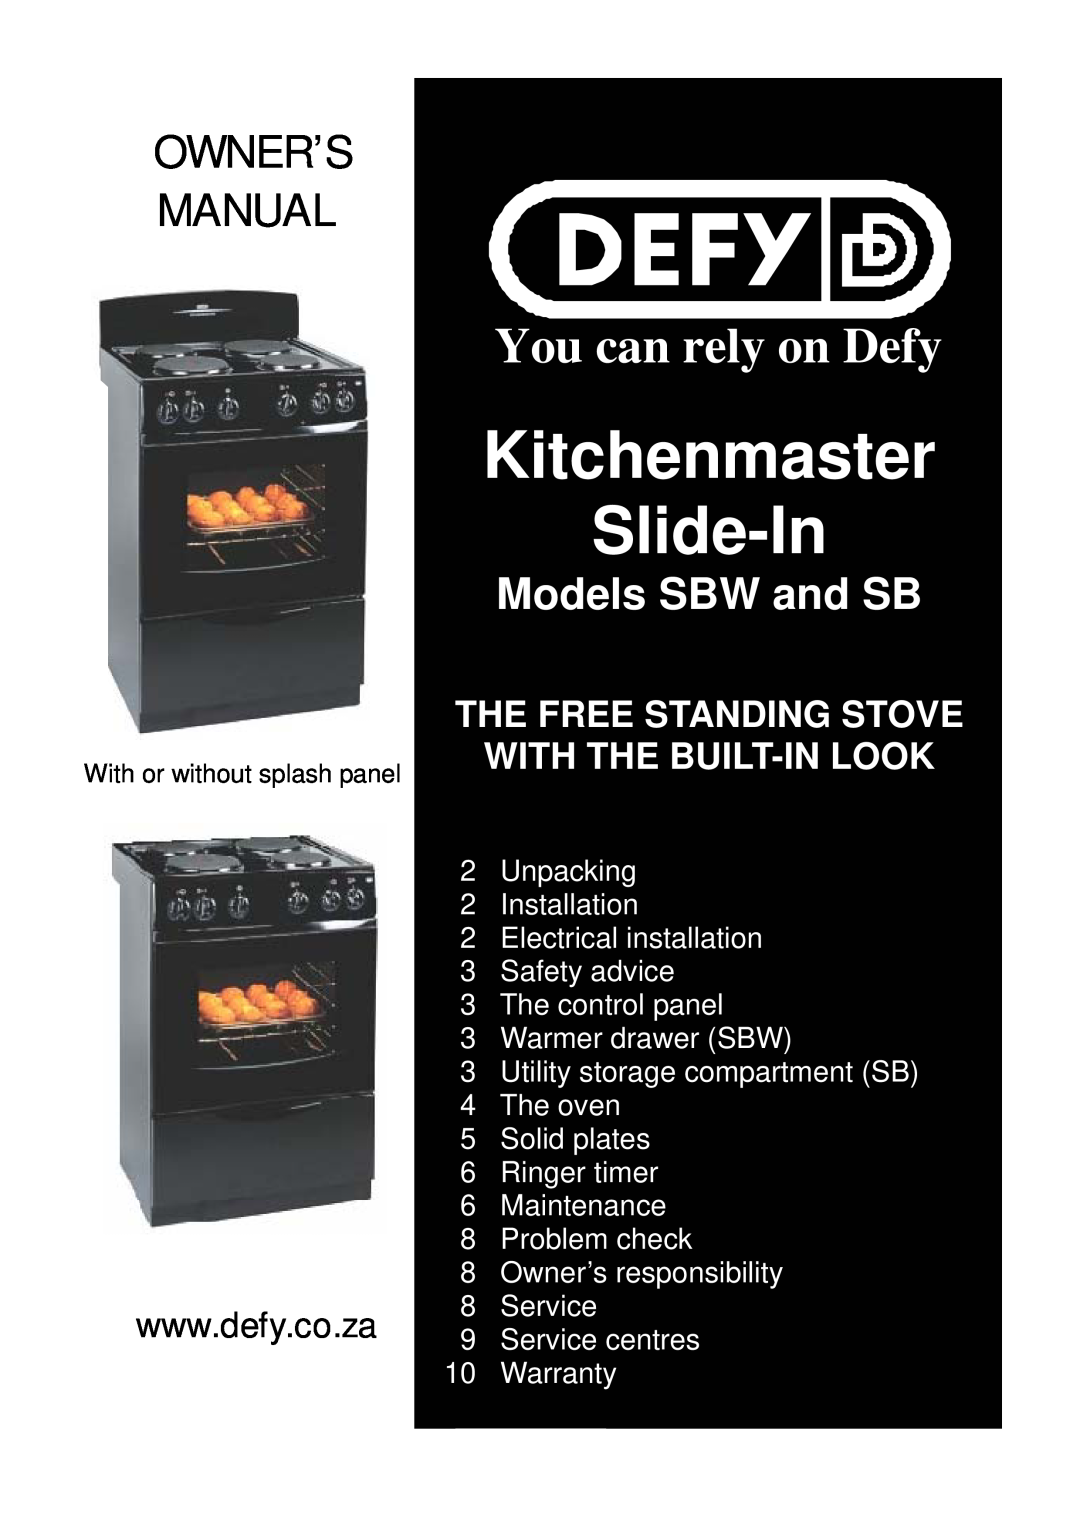 Defy Appliances owner manual Kitchenmaster Slide-In, Owner’S Manual, You can rely on Defy, Models SBW and SB 